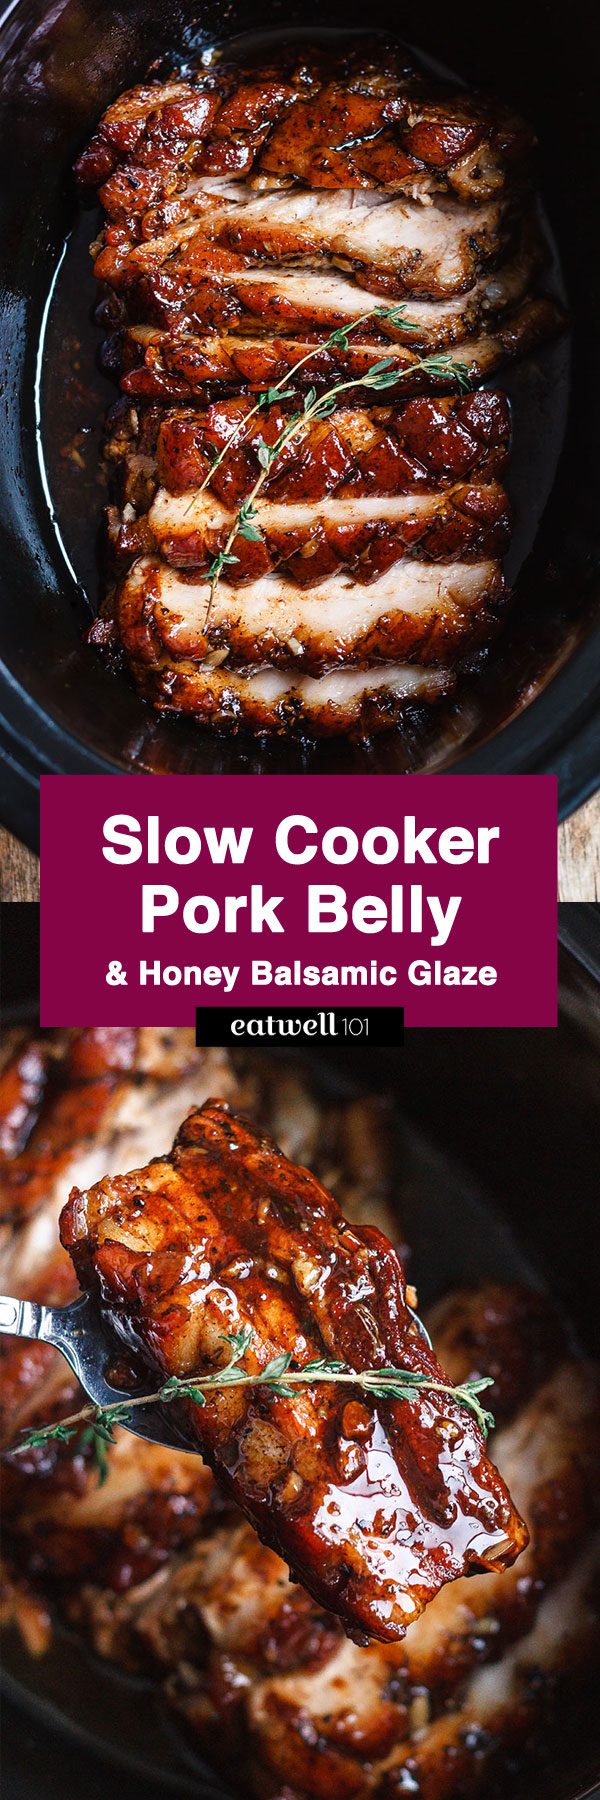 Slow Cooker Pork Belly with Honey Balsamic Glaze - #pork #recipe #slow-cooker #eatwell101 -  Fall-apart tender and infused with a sticky tangy glaze.